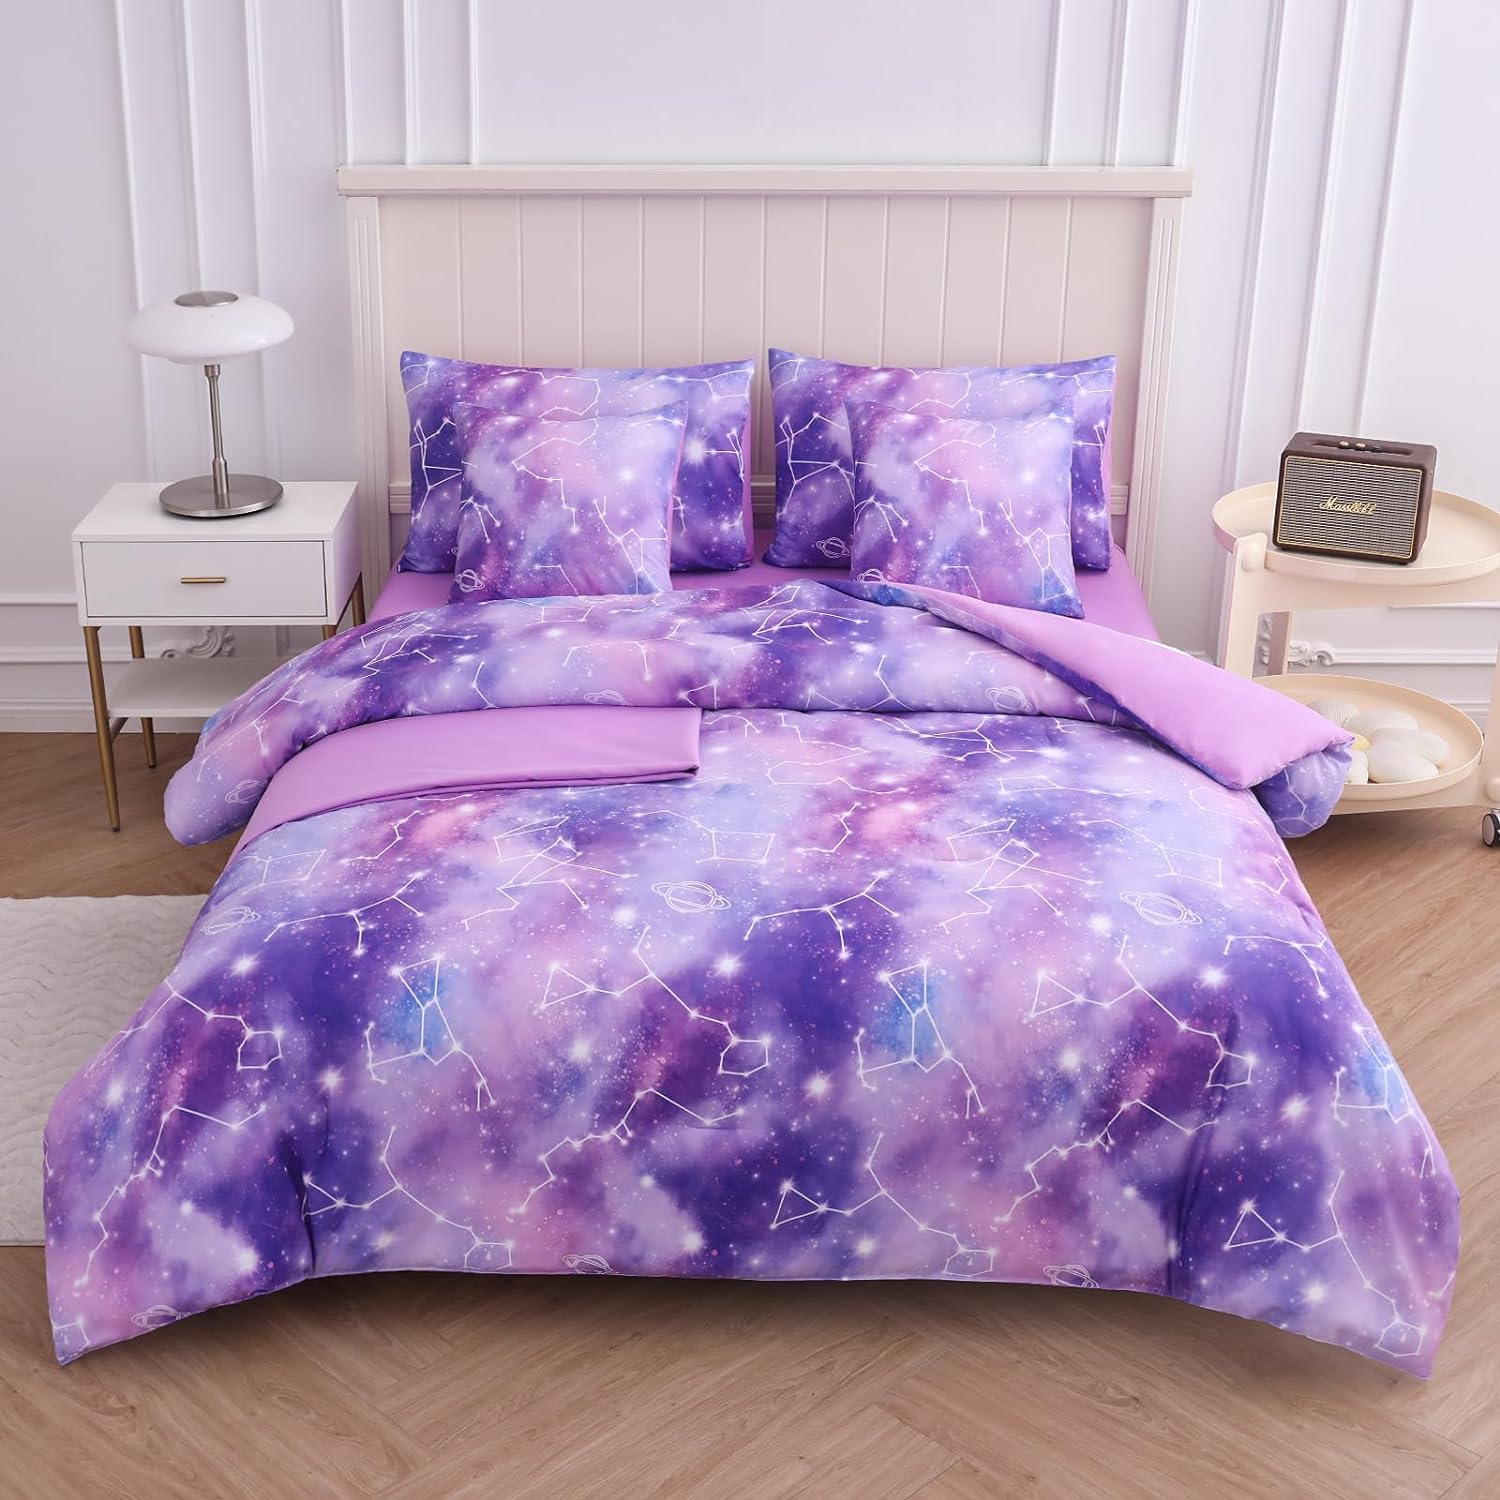 thinkstar Bedding Sets Kids Bedding Sets For Girls,Galaxy Bedding 7Pieces Glitter Pink Comforter Colorful Comforter Full Size